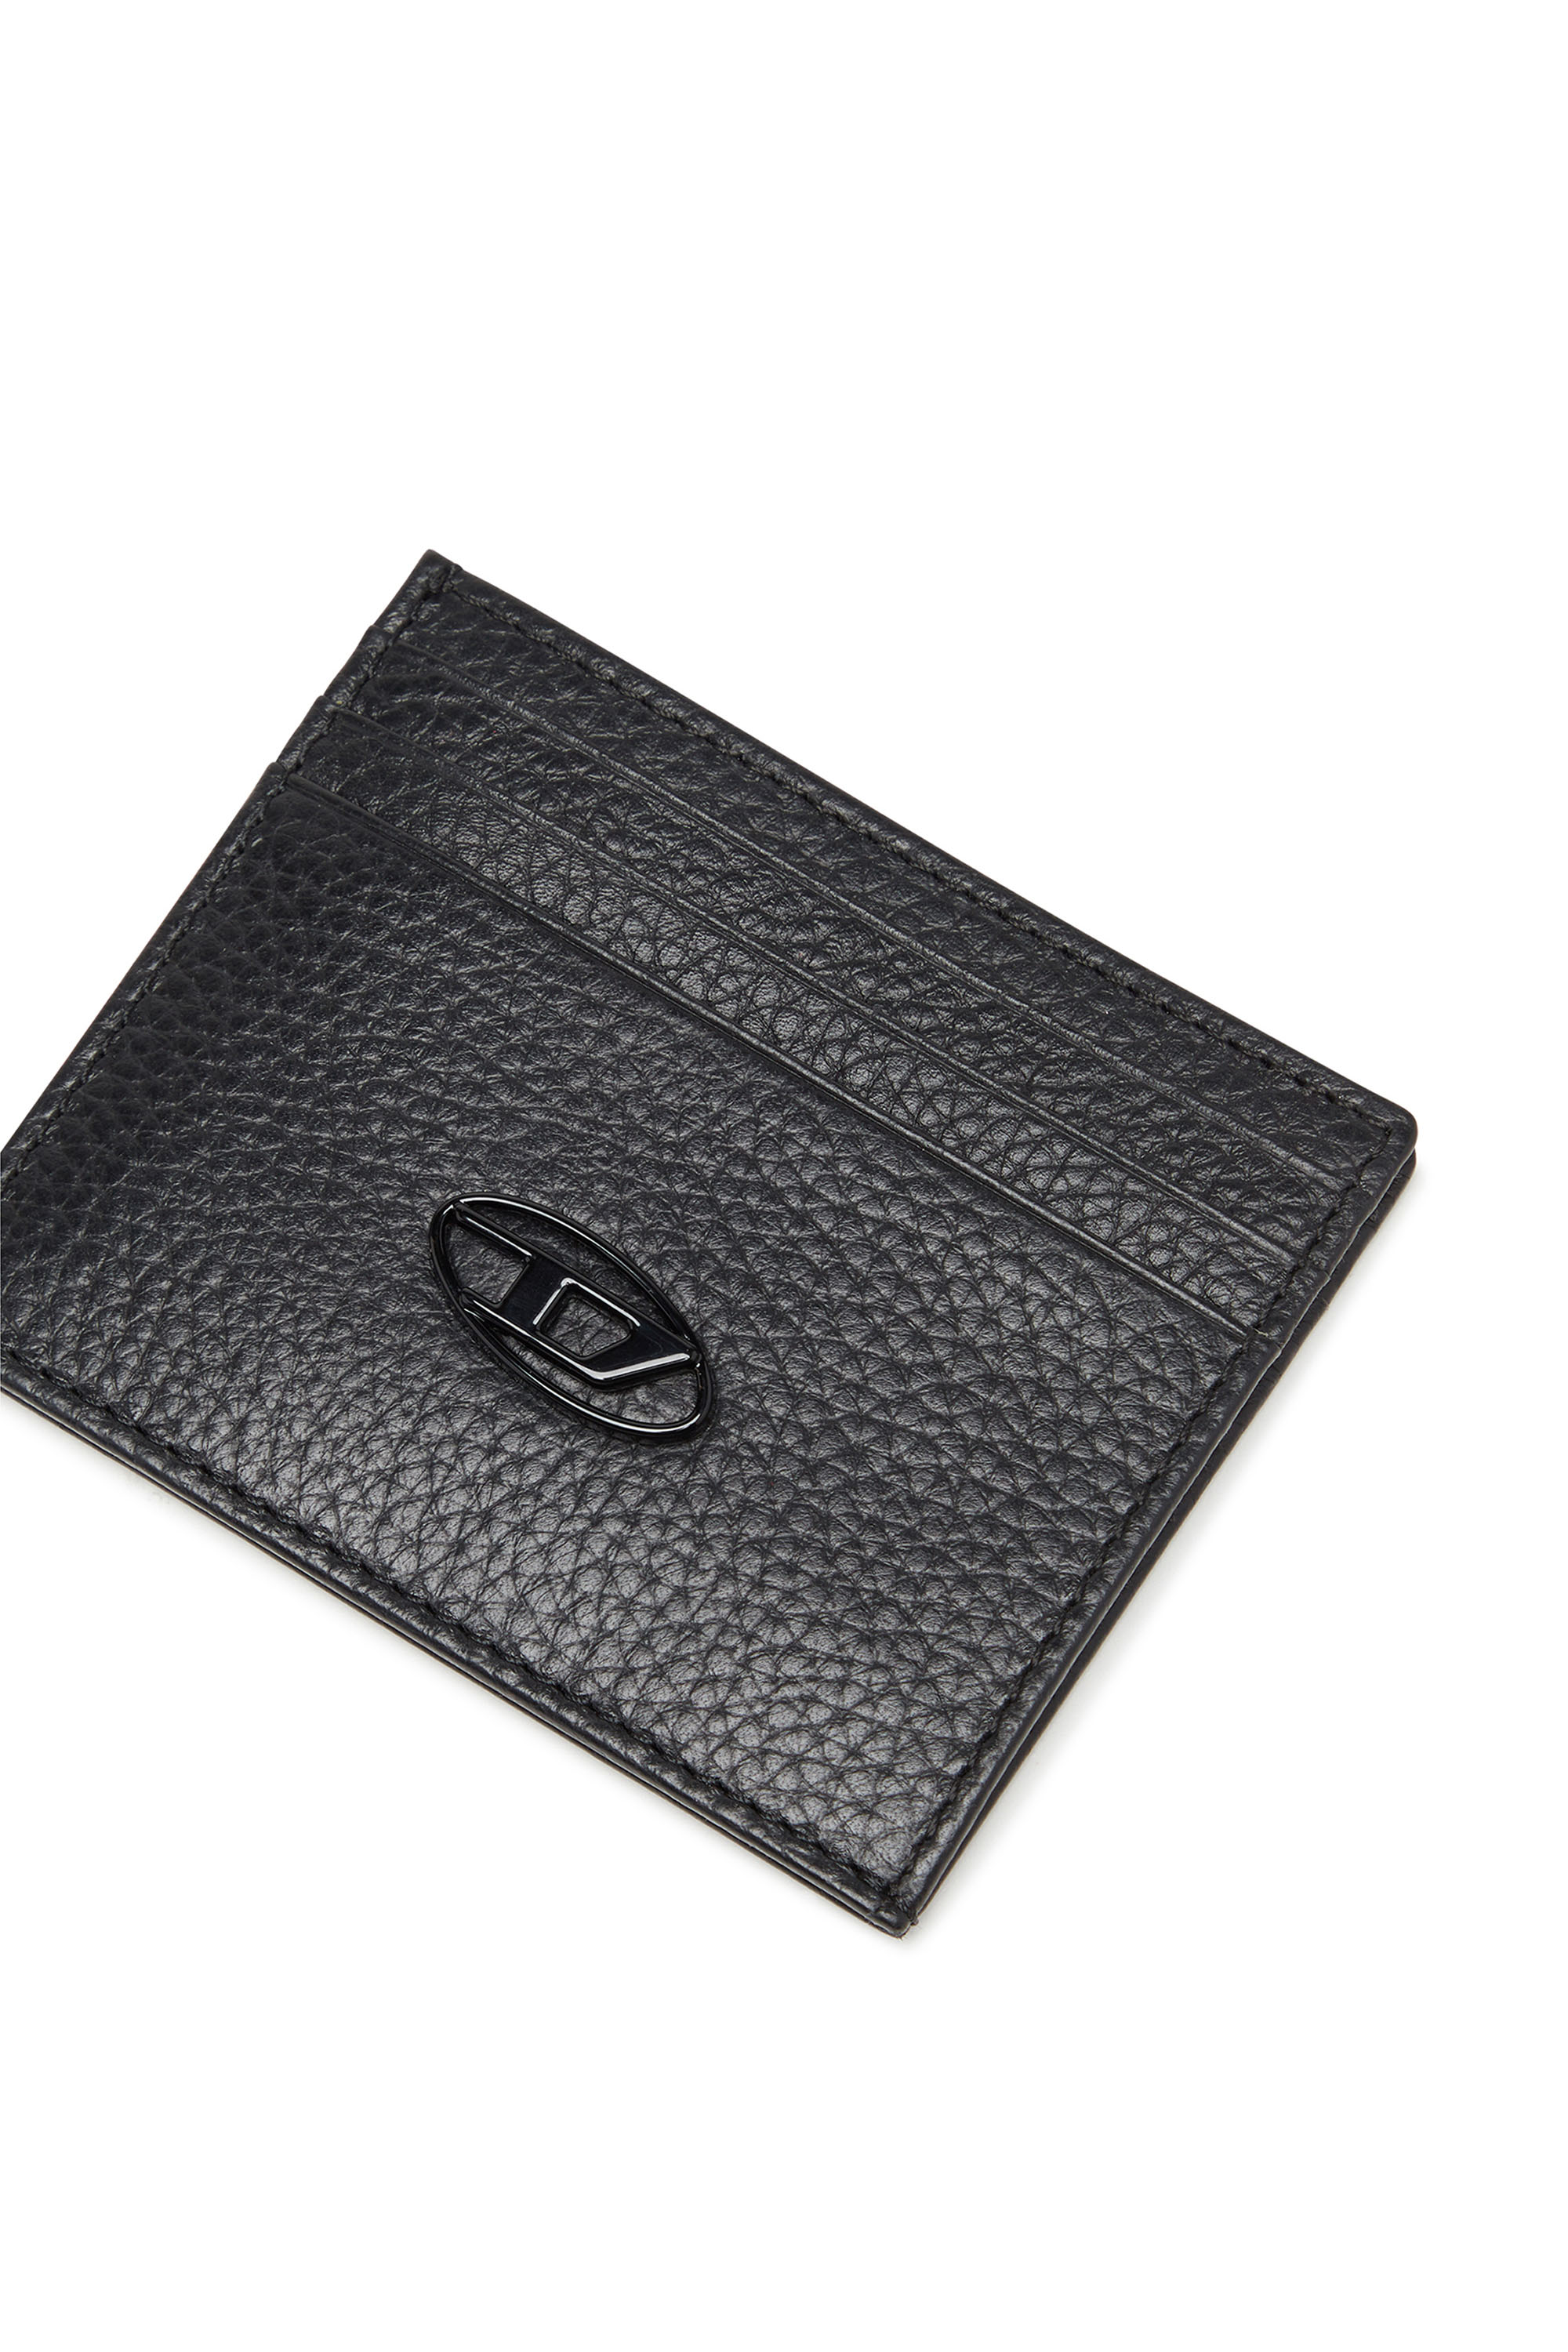 Diesel - CARD CASE, Man Card case in grained leather in Black - Image 5